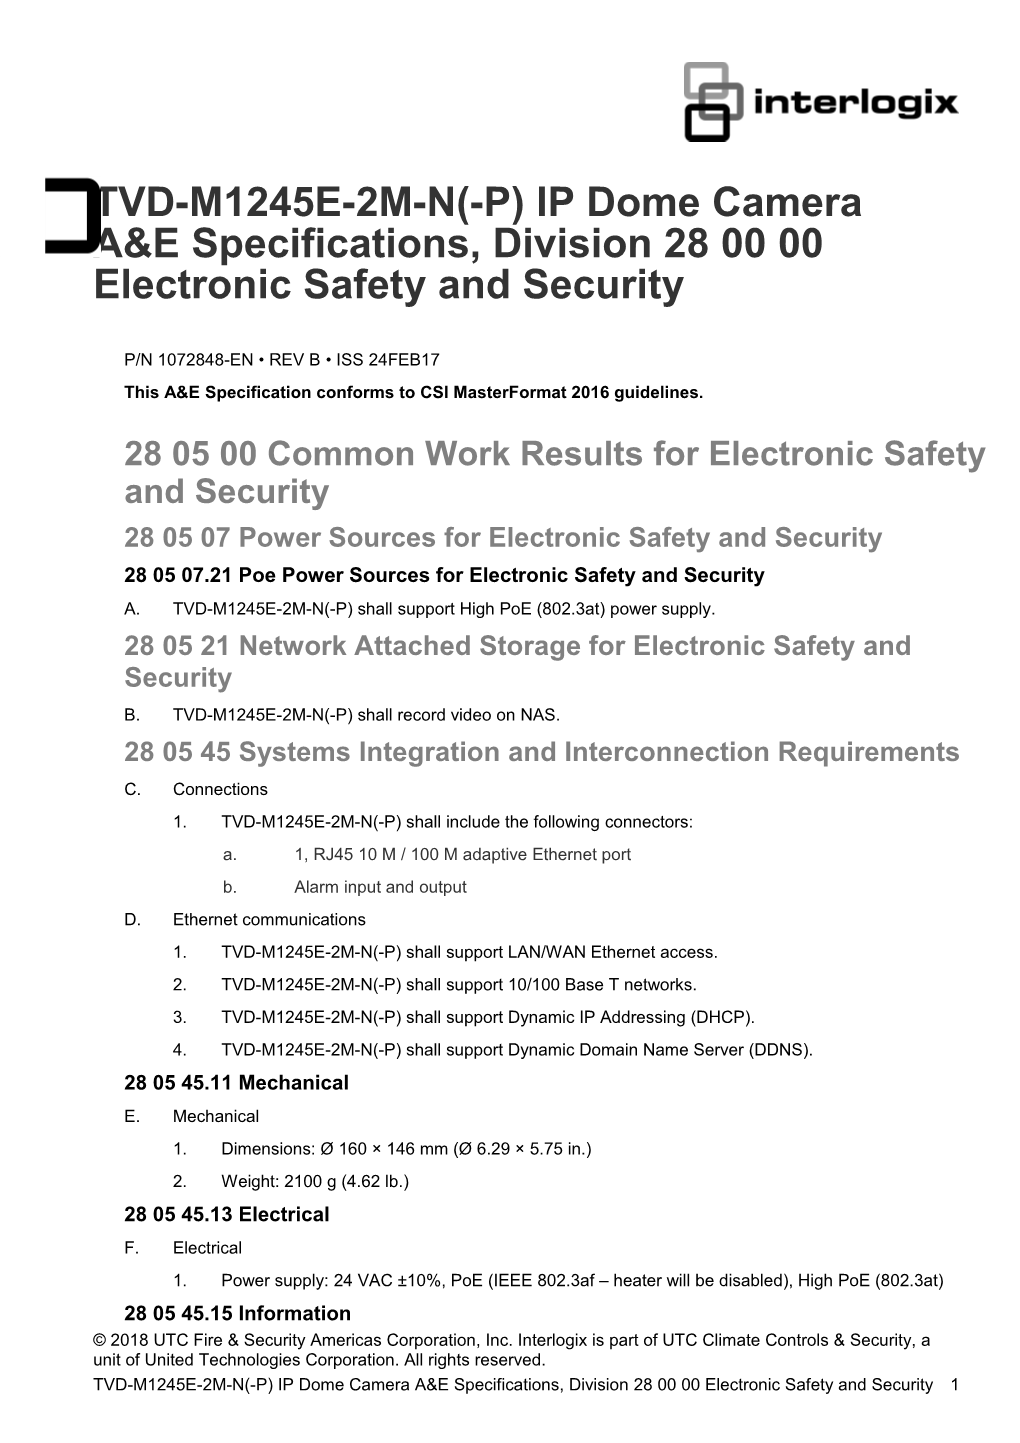 TVD-M1245E-2M-N(-P) IP Dome Camera A&E Specifications, Division 28 00 00 Electronic Safety